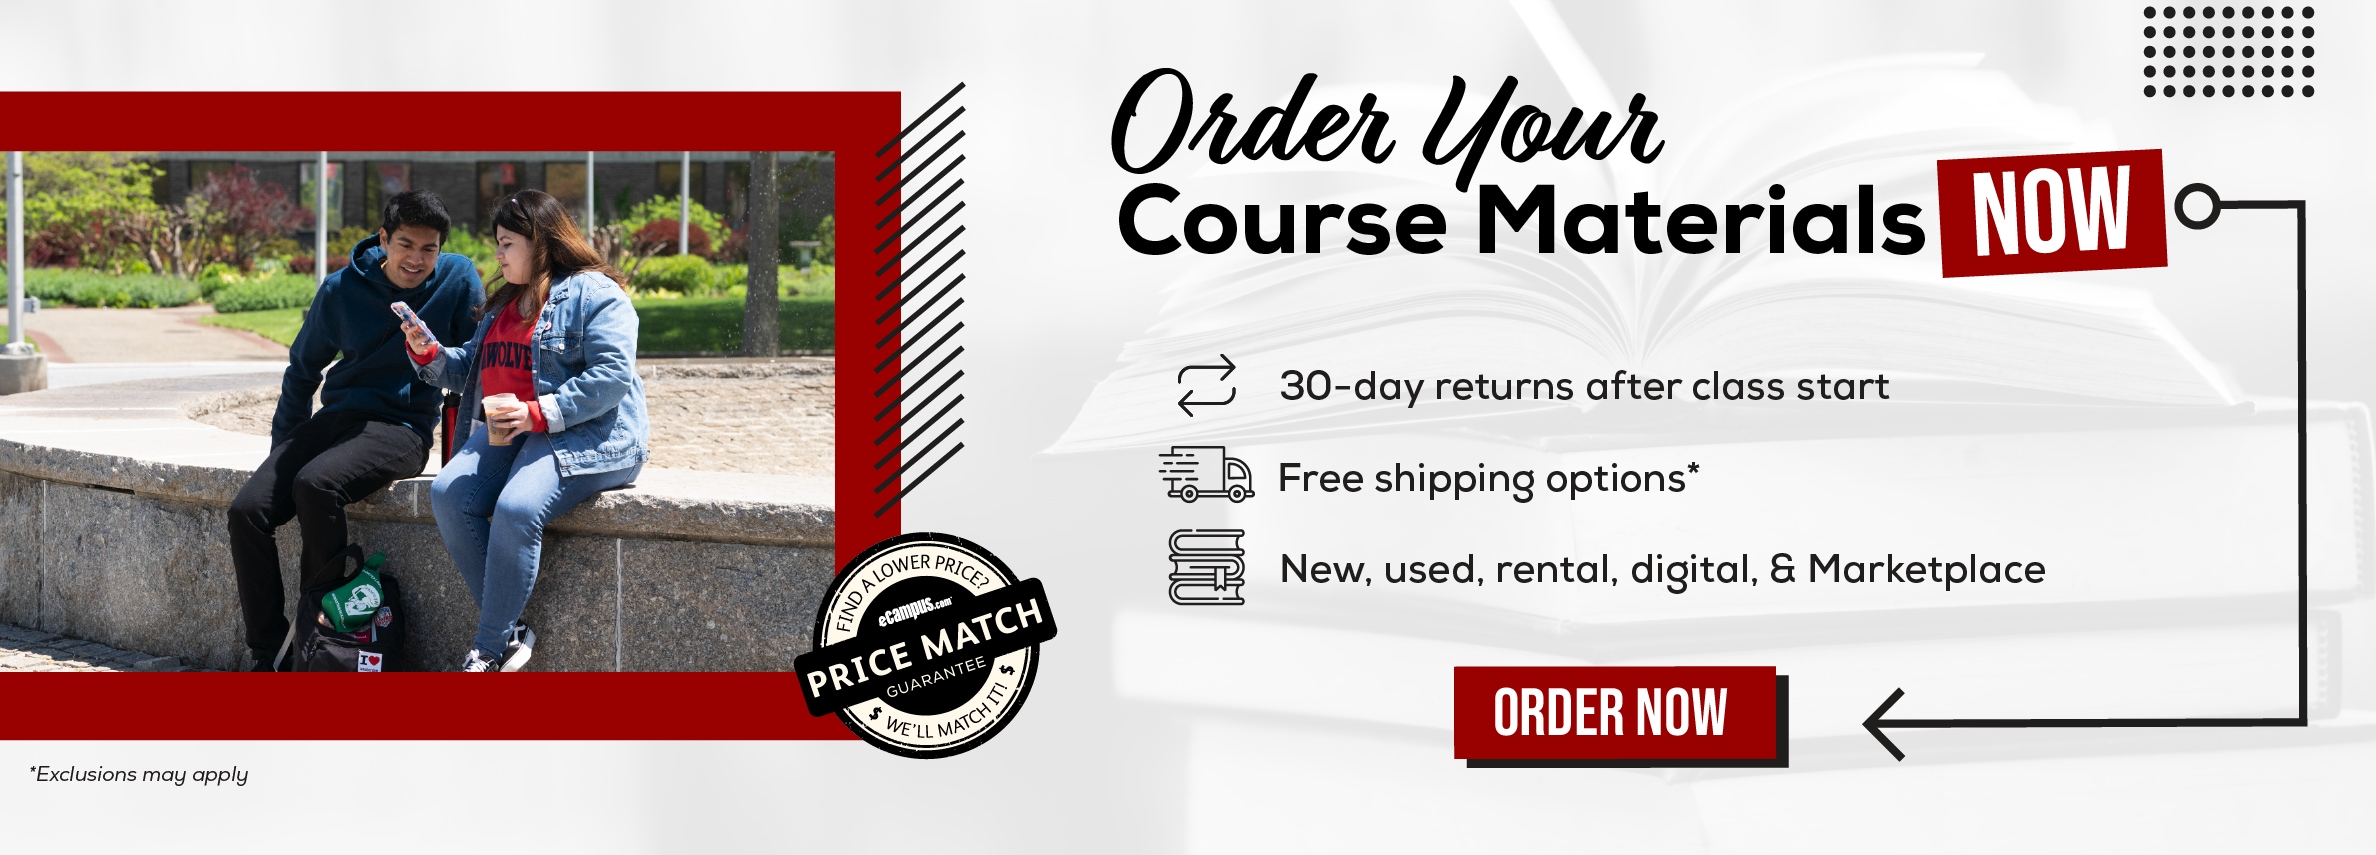 Order Your Course Materials Now. 30-day returns after class start. Free shipping options*. New, used, rental, digital, & Marketplace. Order now. *Exclusions may apply.